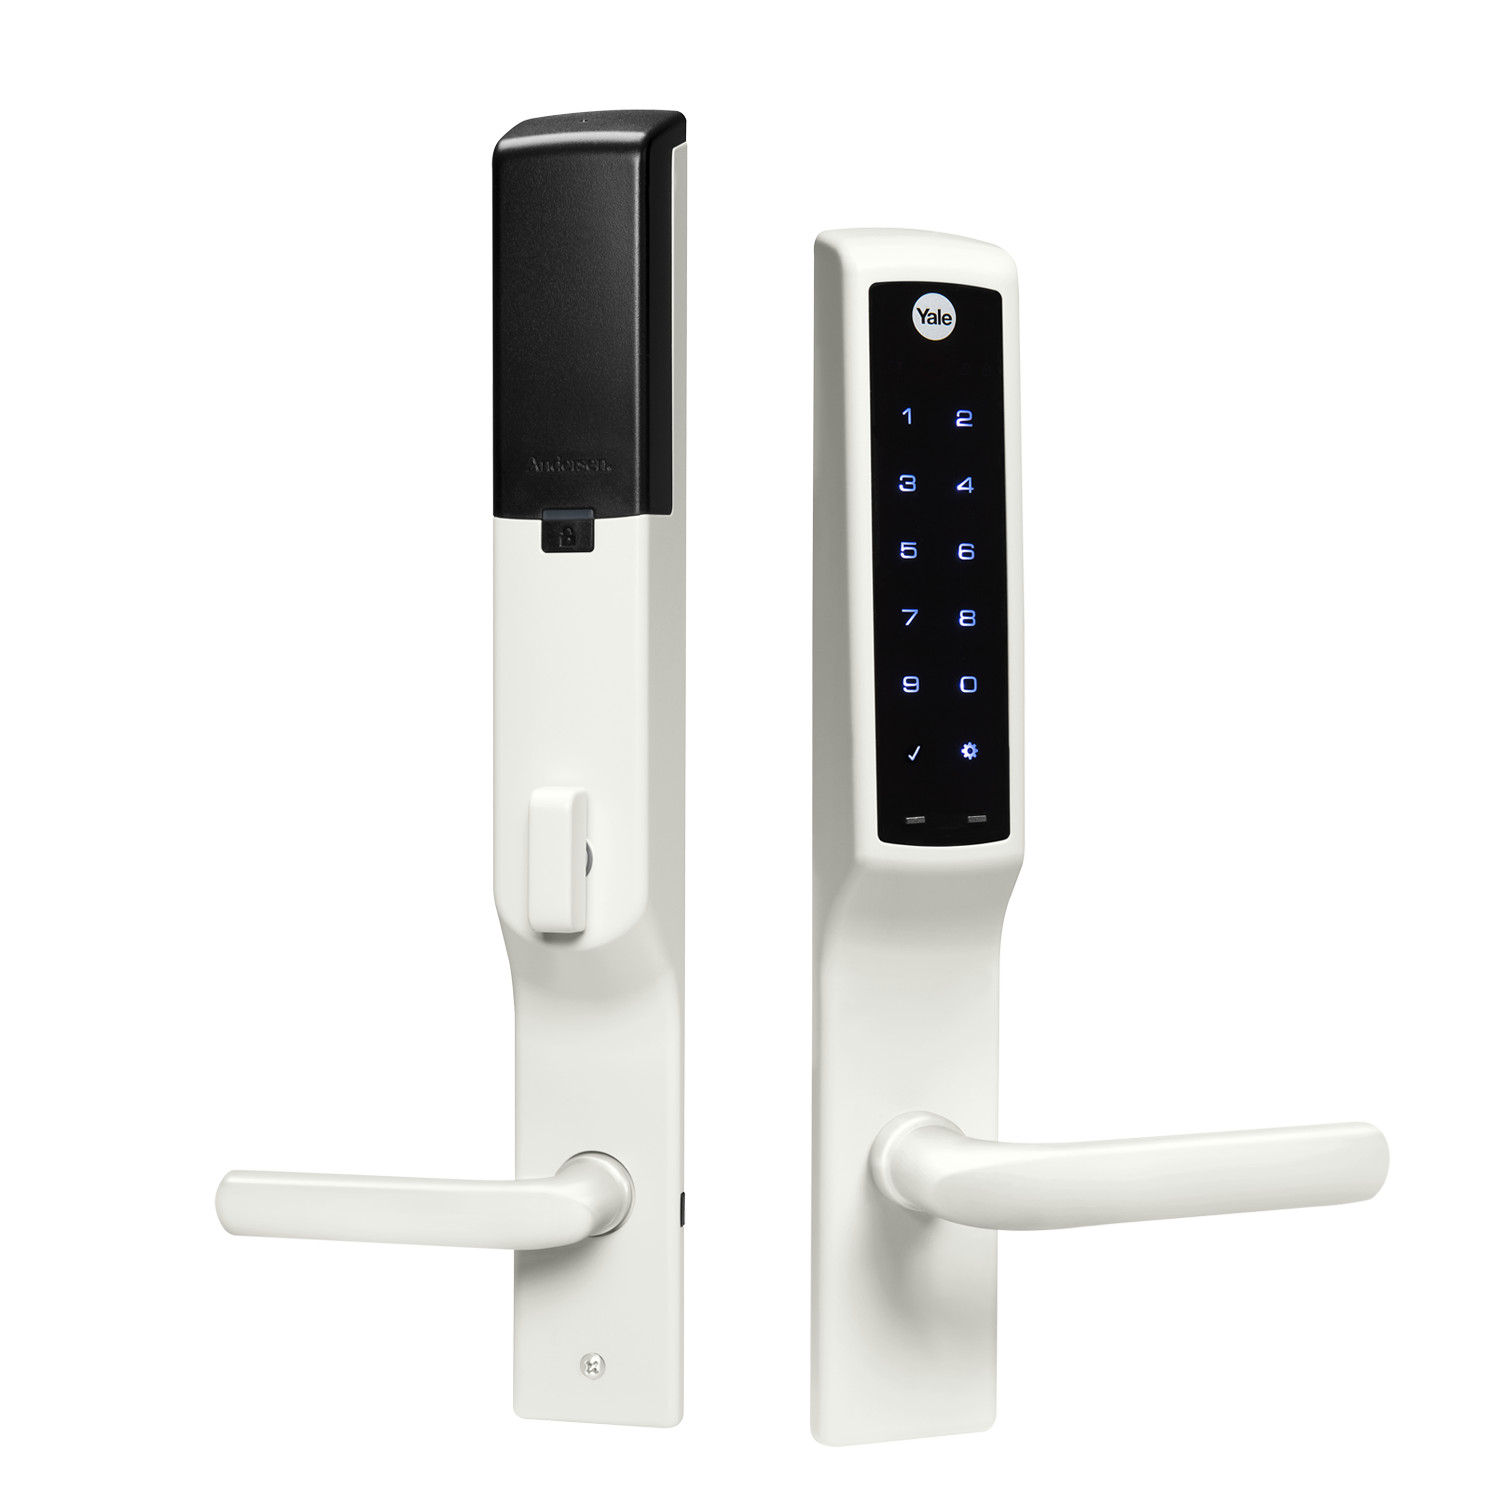 Yale Assure Lock for Andersen Patio Doors - Wi-Fi and Bluetooth - White